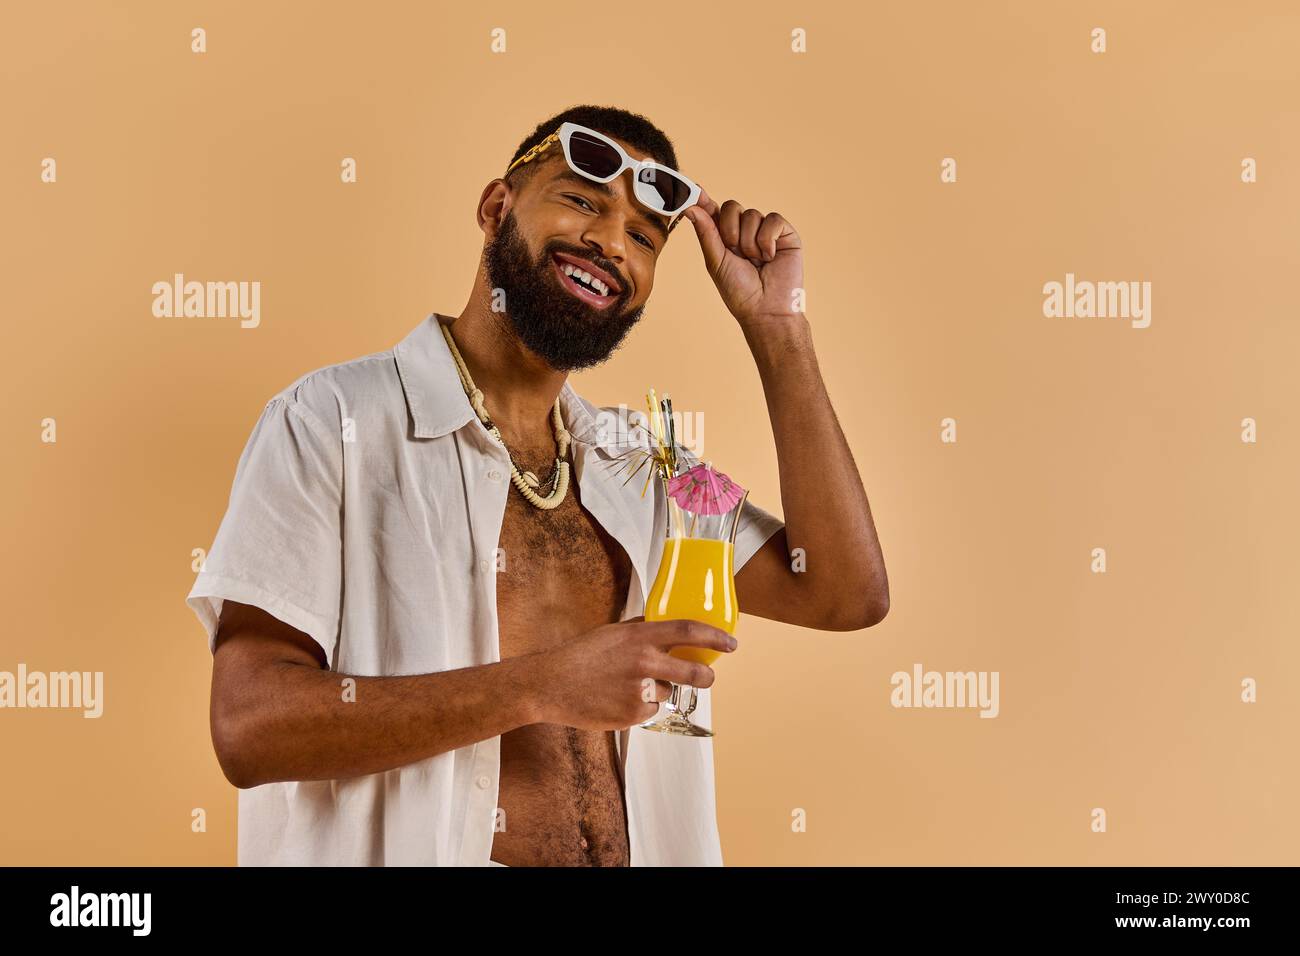 A stylish man shielded by trendy sunglasses holds a cool drink in his hand, exuding a relaxed and confident vibe as he enjoys his beverage. Stock Photo